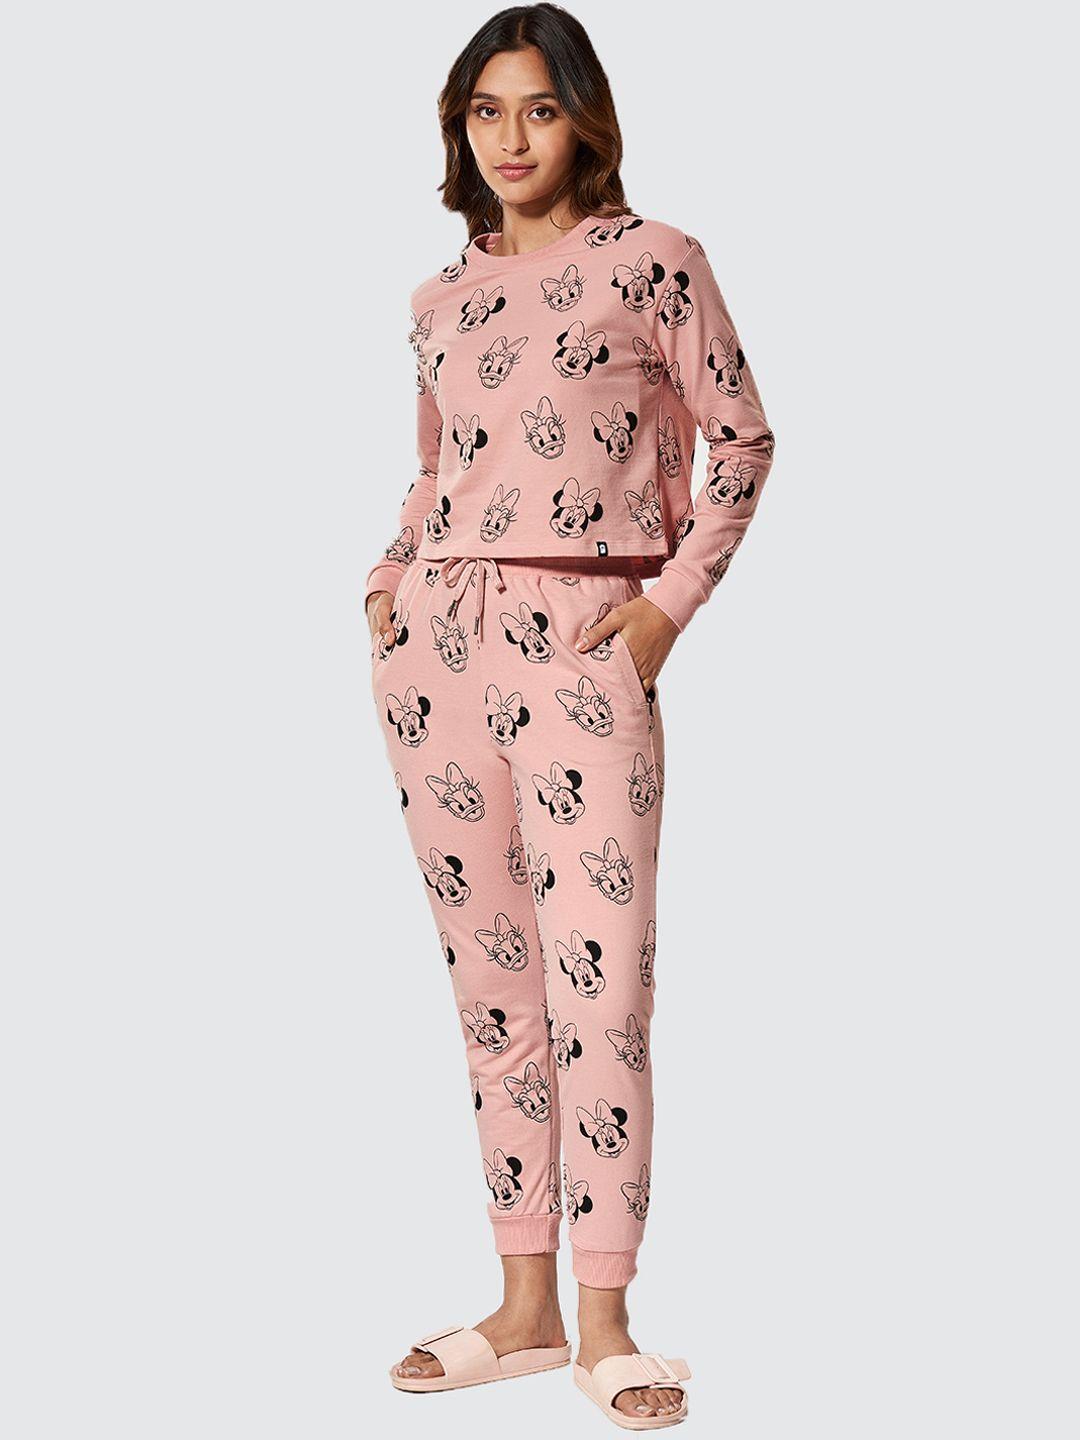 the souled store women pink minnie & daisy printed co-ords